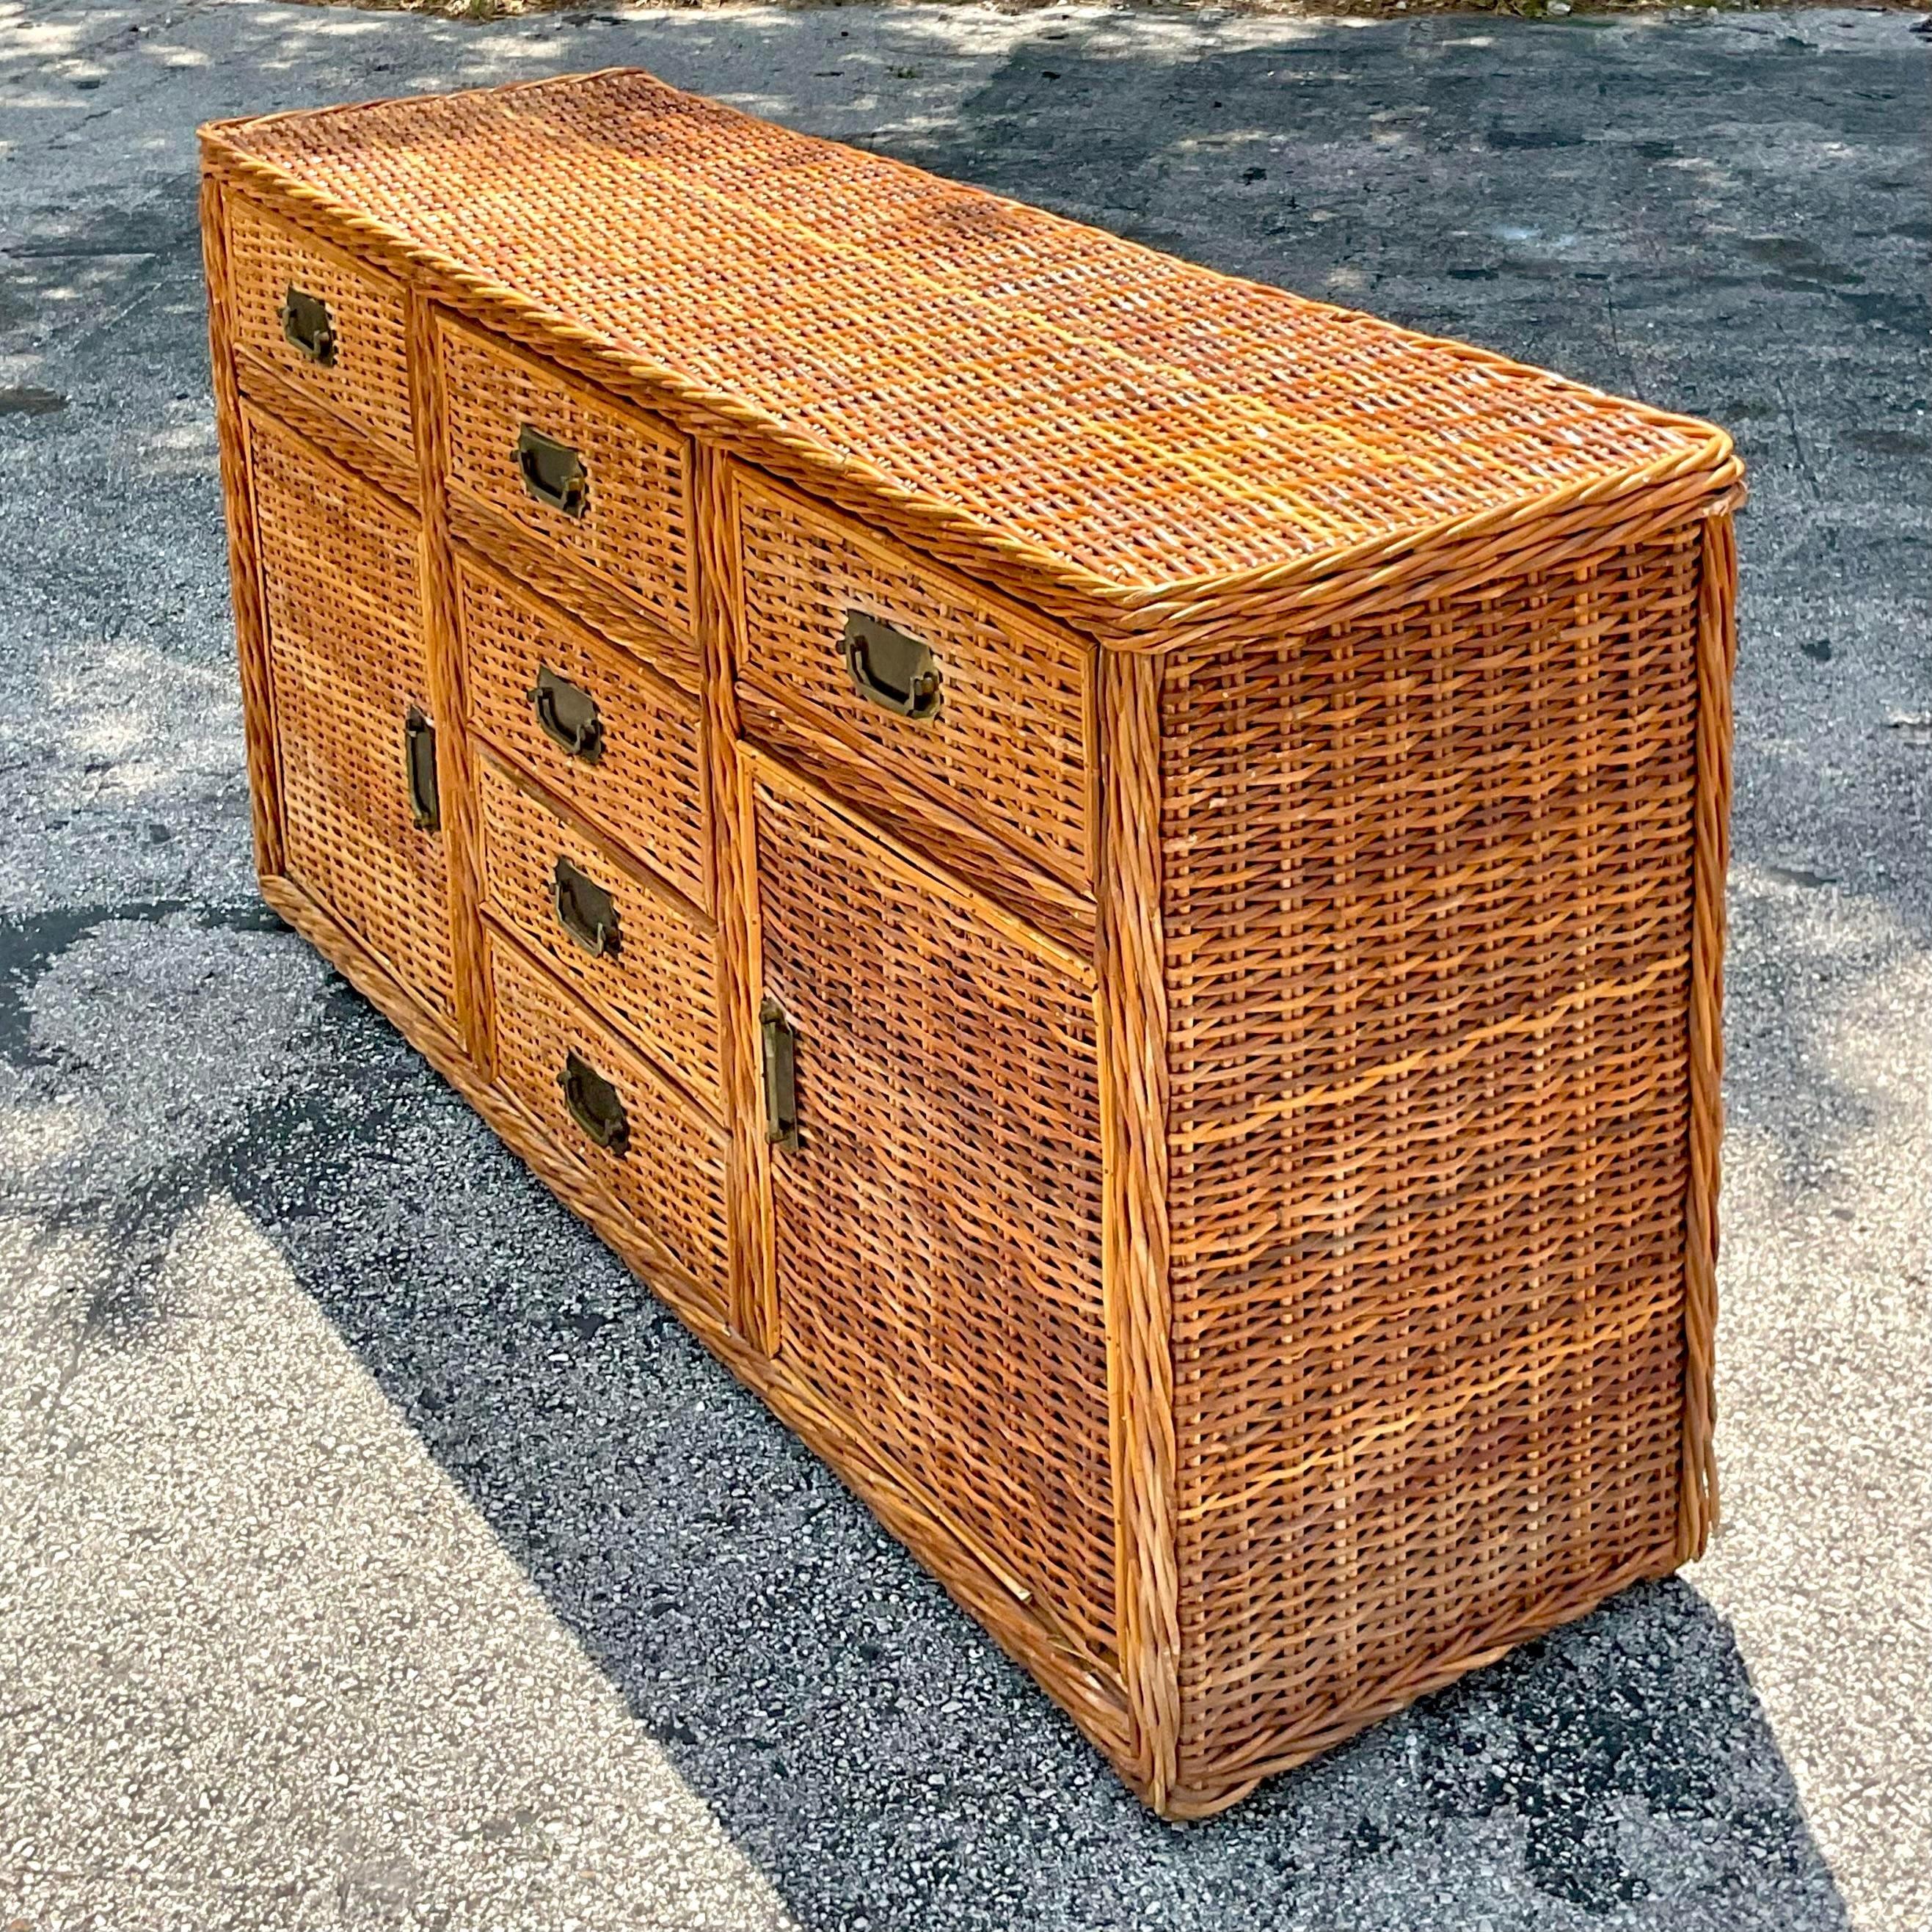 Enhance your home with the Vintage Coastal Woven Rattan Credenza. This American-style piece combines natural rattan craftsmanship with functional elegance, offering ample storage and a touch of relaxed coastal sophistication to any room.